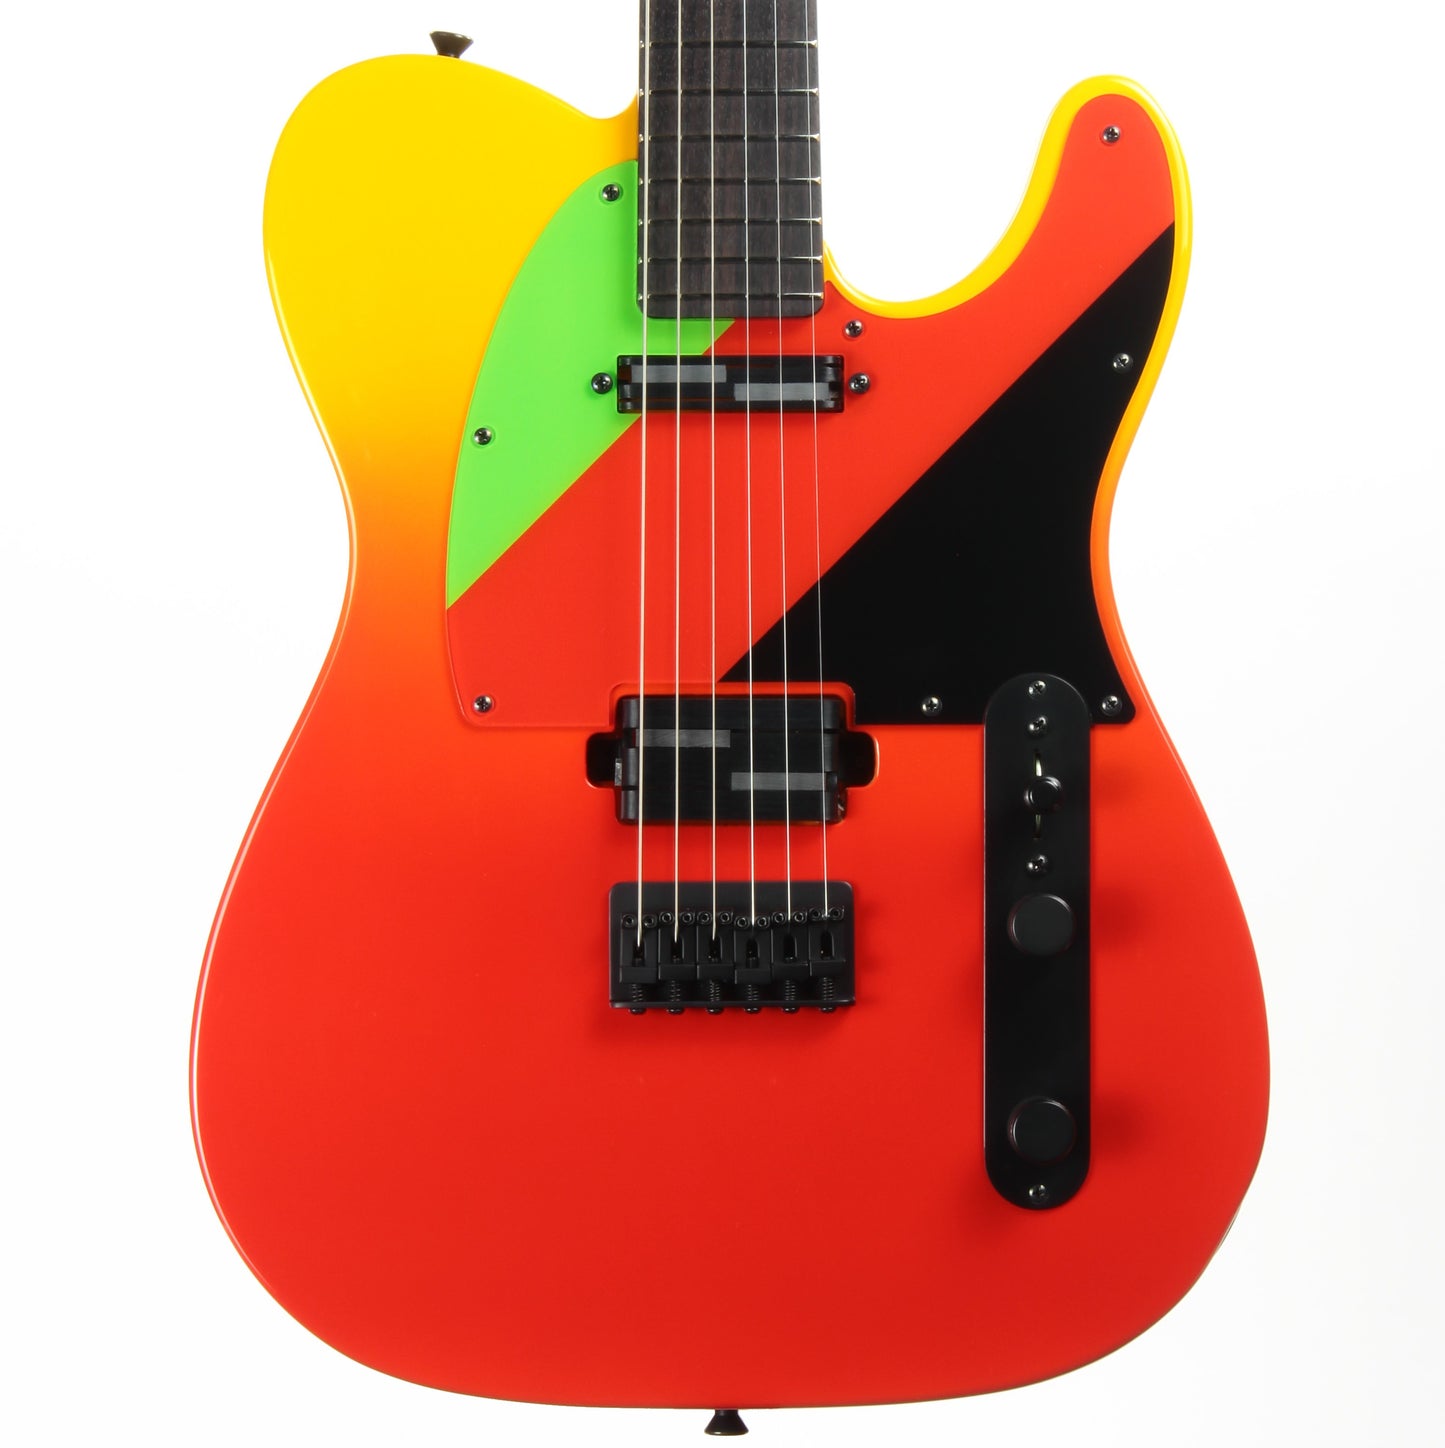 2020 Fender Evangelion Asuka Red Telecaster - Made in Japan Tele MIJ - Limited Edition